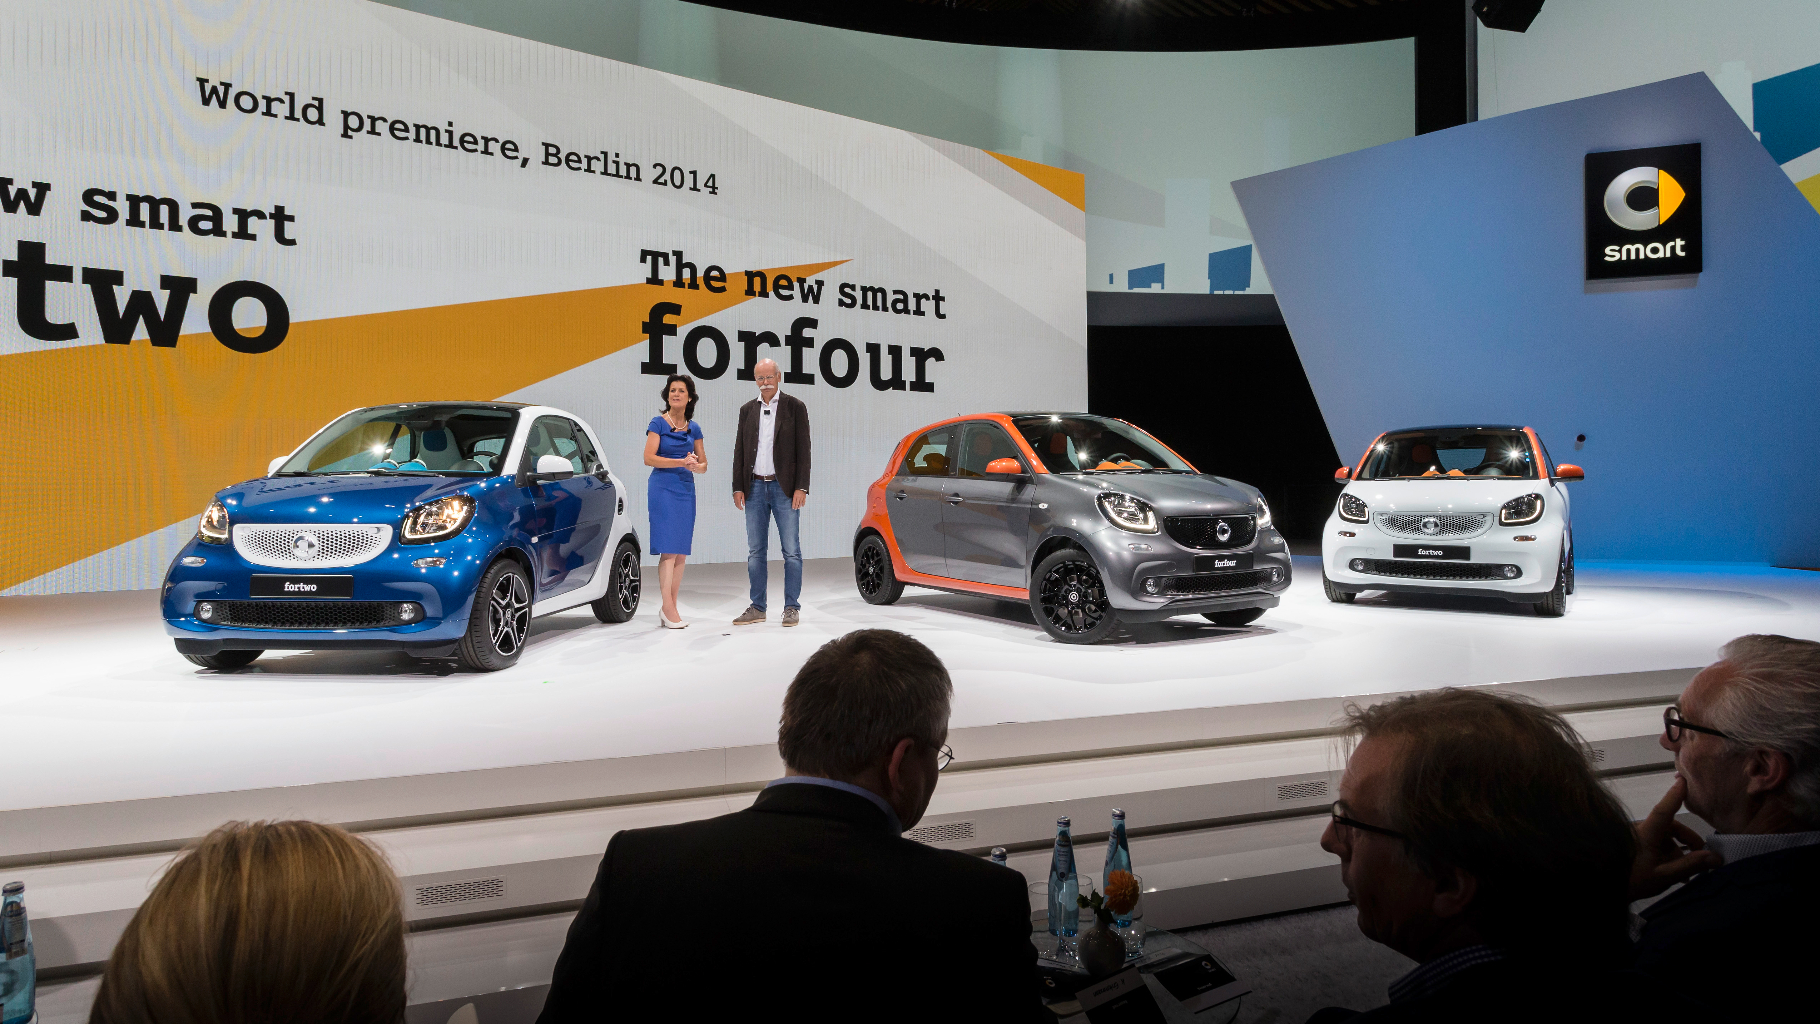 The new smart fortwo and forfour, World premiere, Berlin 2014 Der neue smart fortwo und forfour, Weltpremiere, Berlin 2014